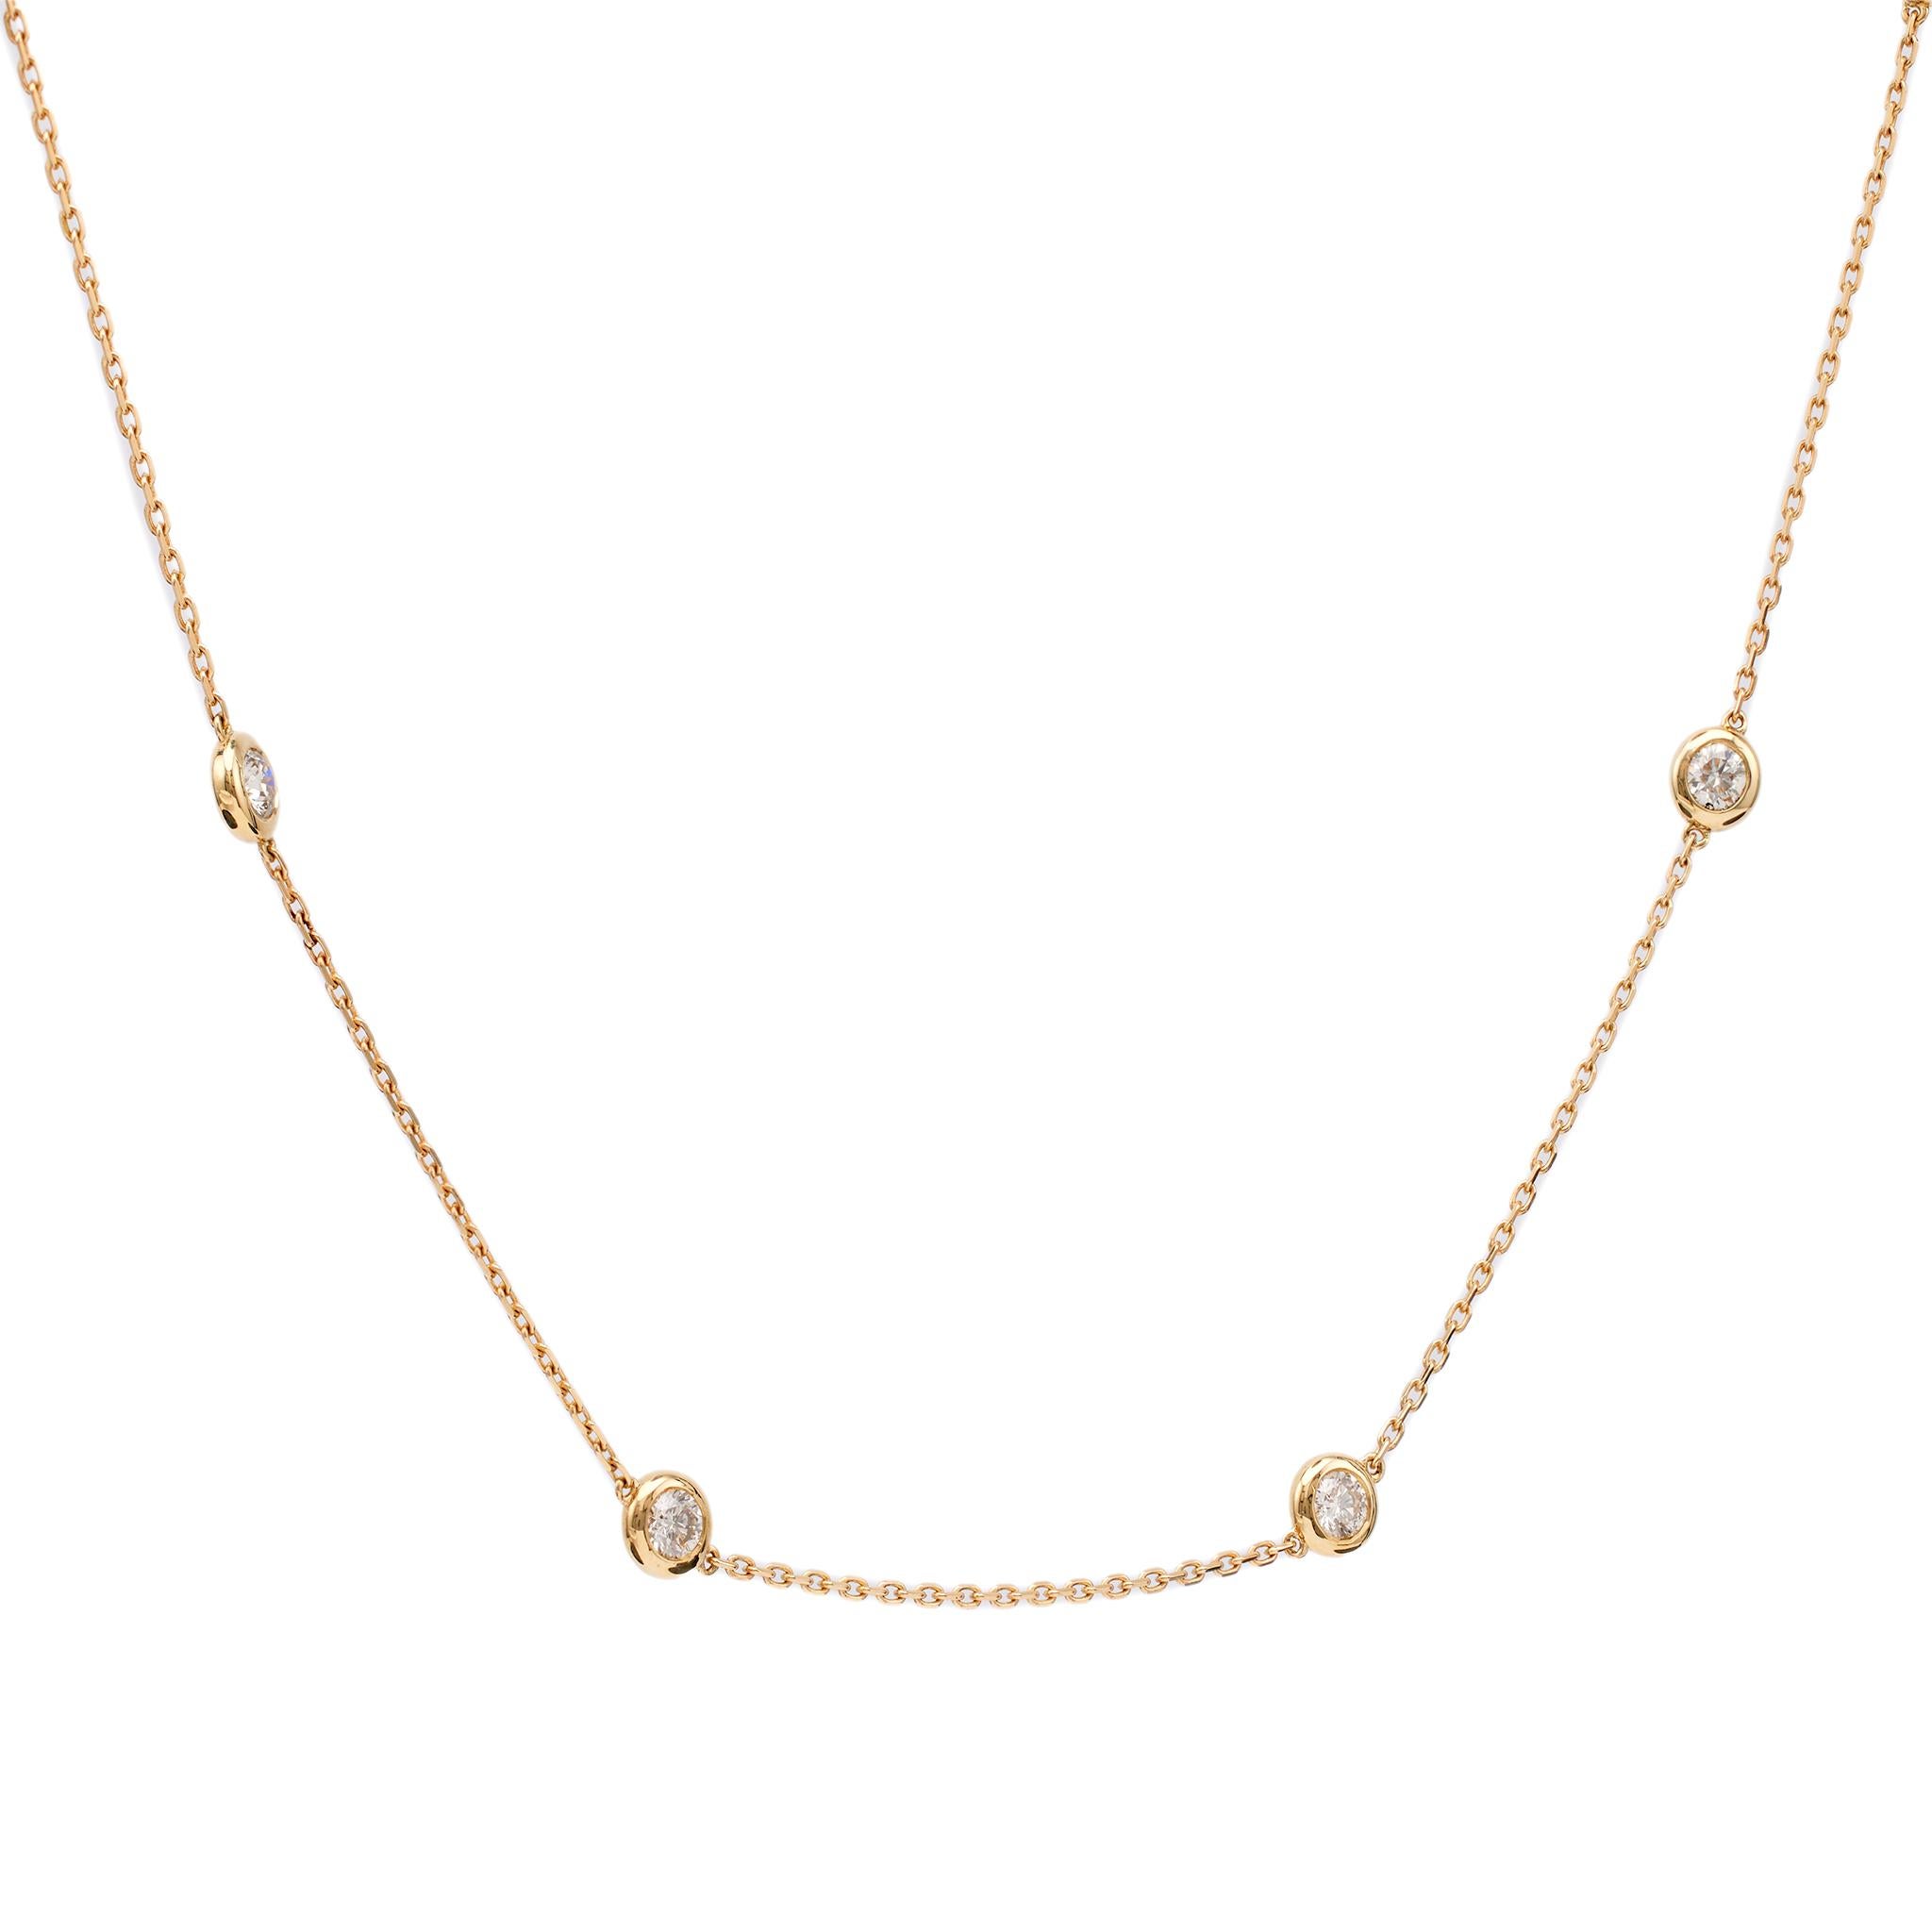 Women's or Men's 14k Yellow Gold Diamonds By The Yard Necklace For Sale